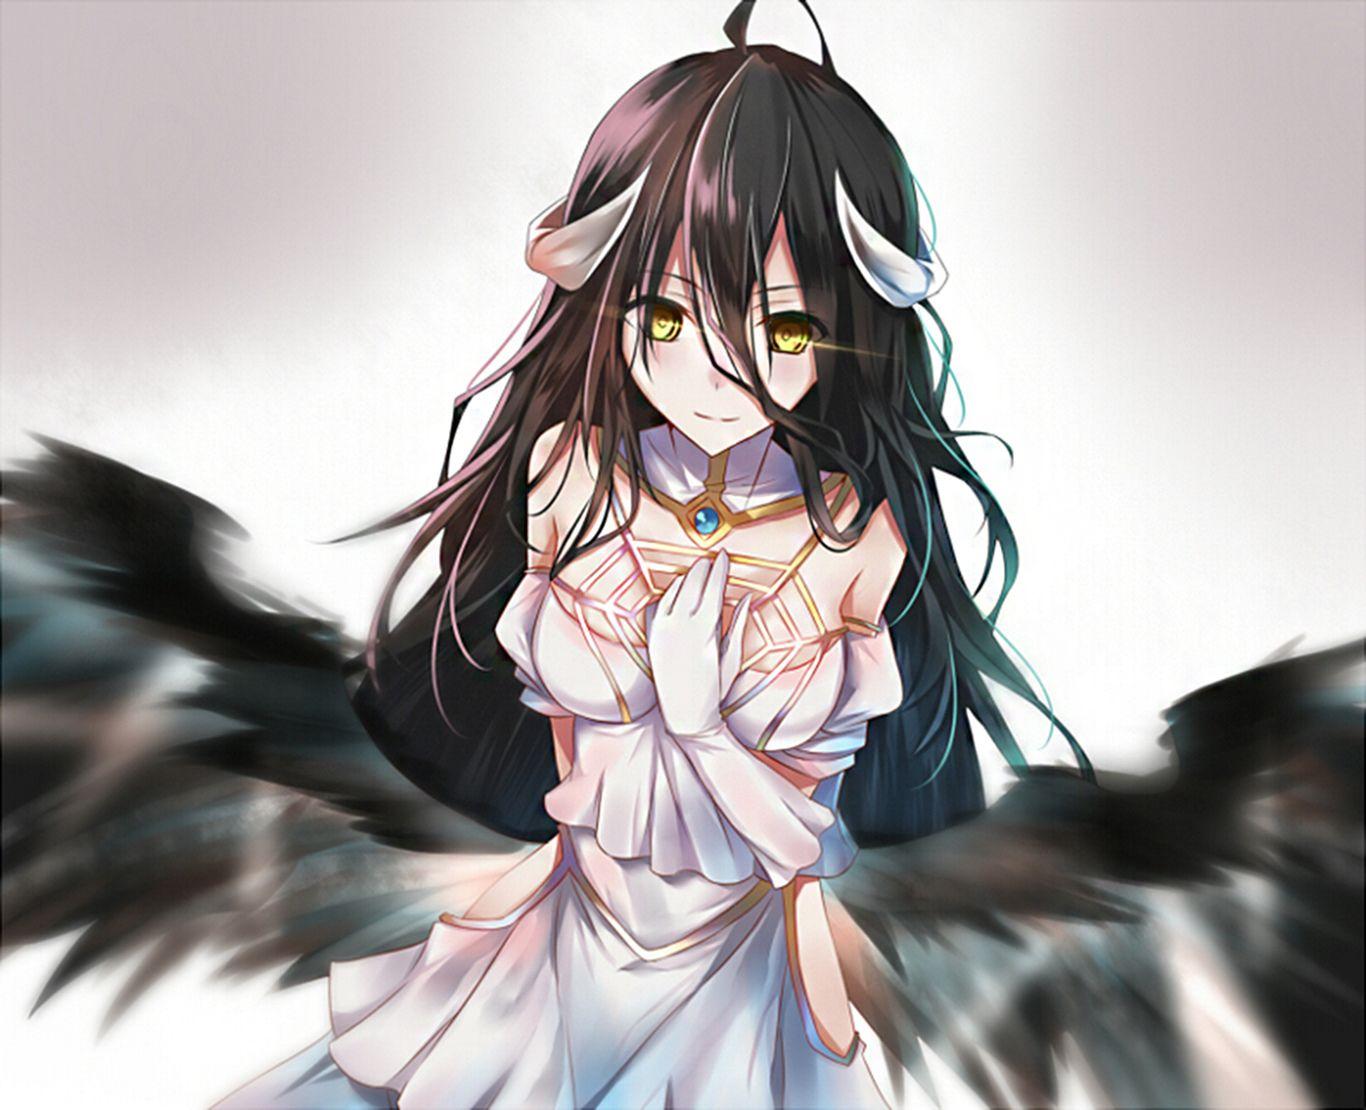 Wallpaper  Overlord anime anime girls Albedo OverLord 2729x3508   ConsistentHypocrite  987567  HD Wallpapers  WallHere